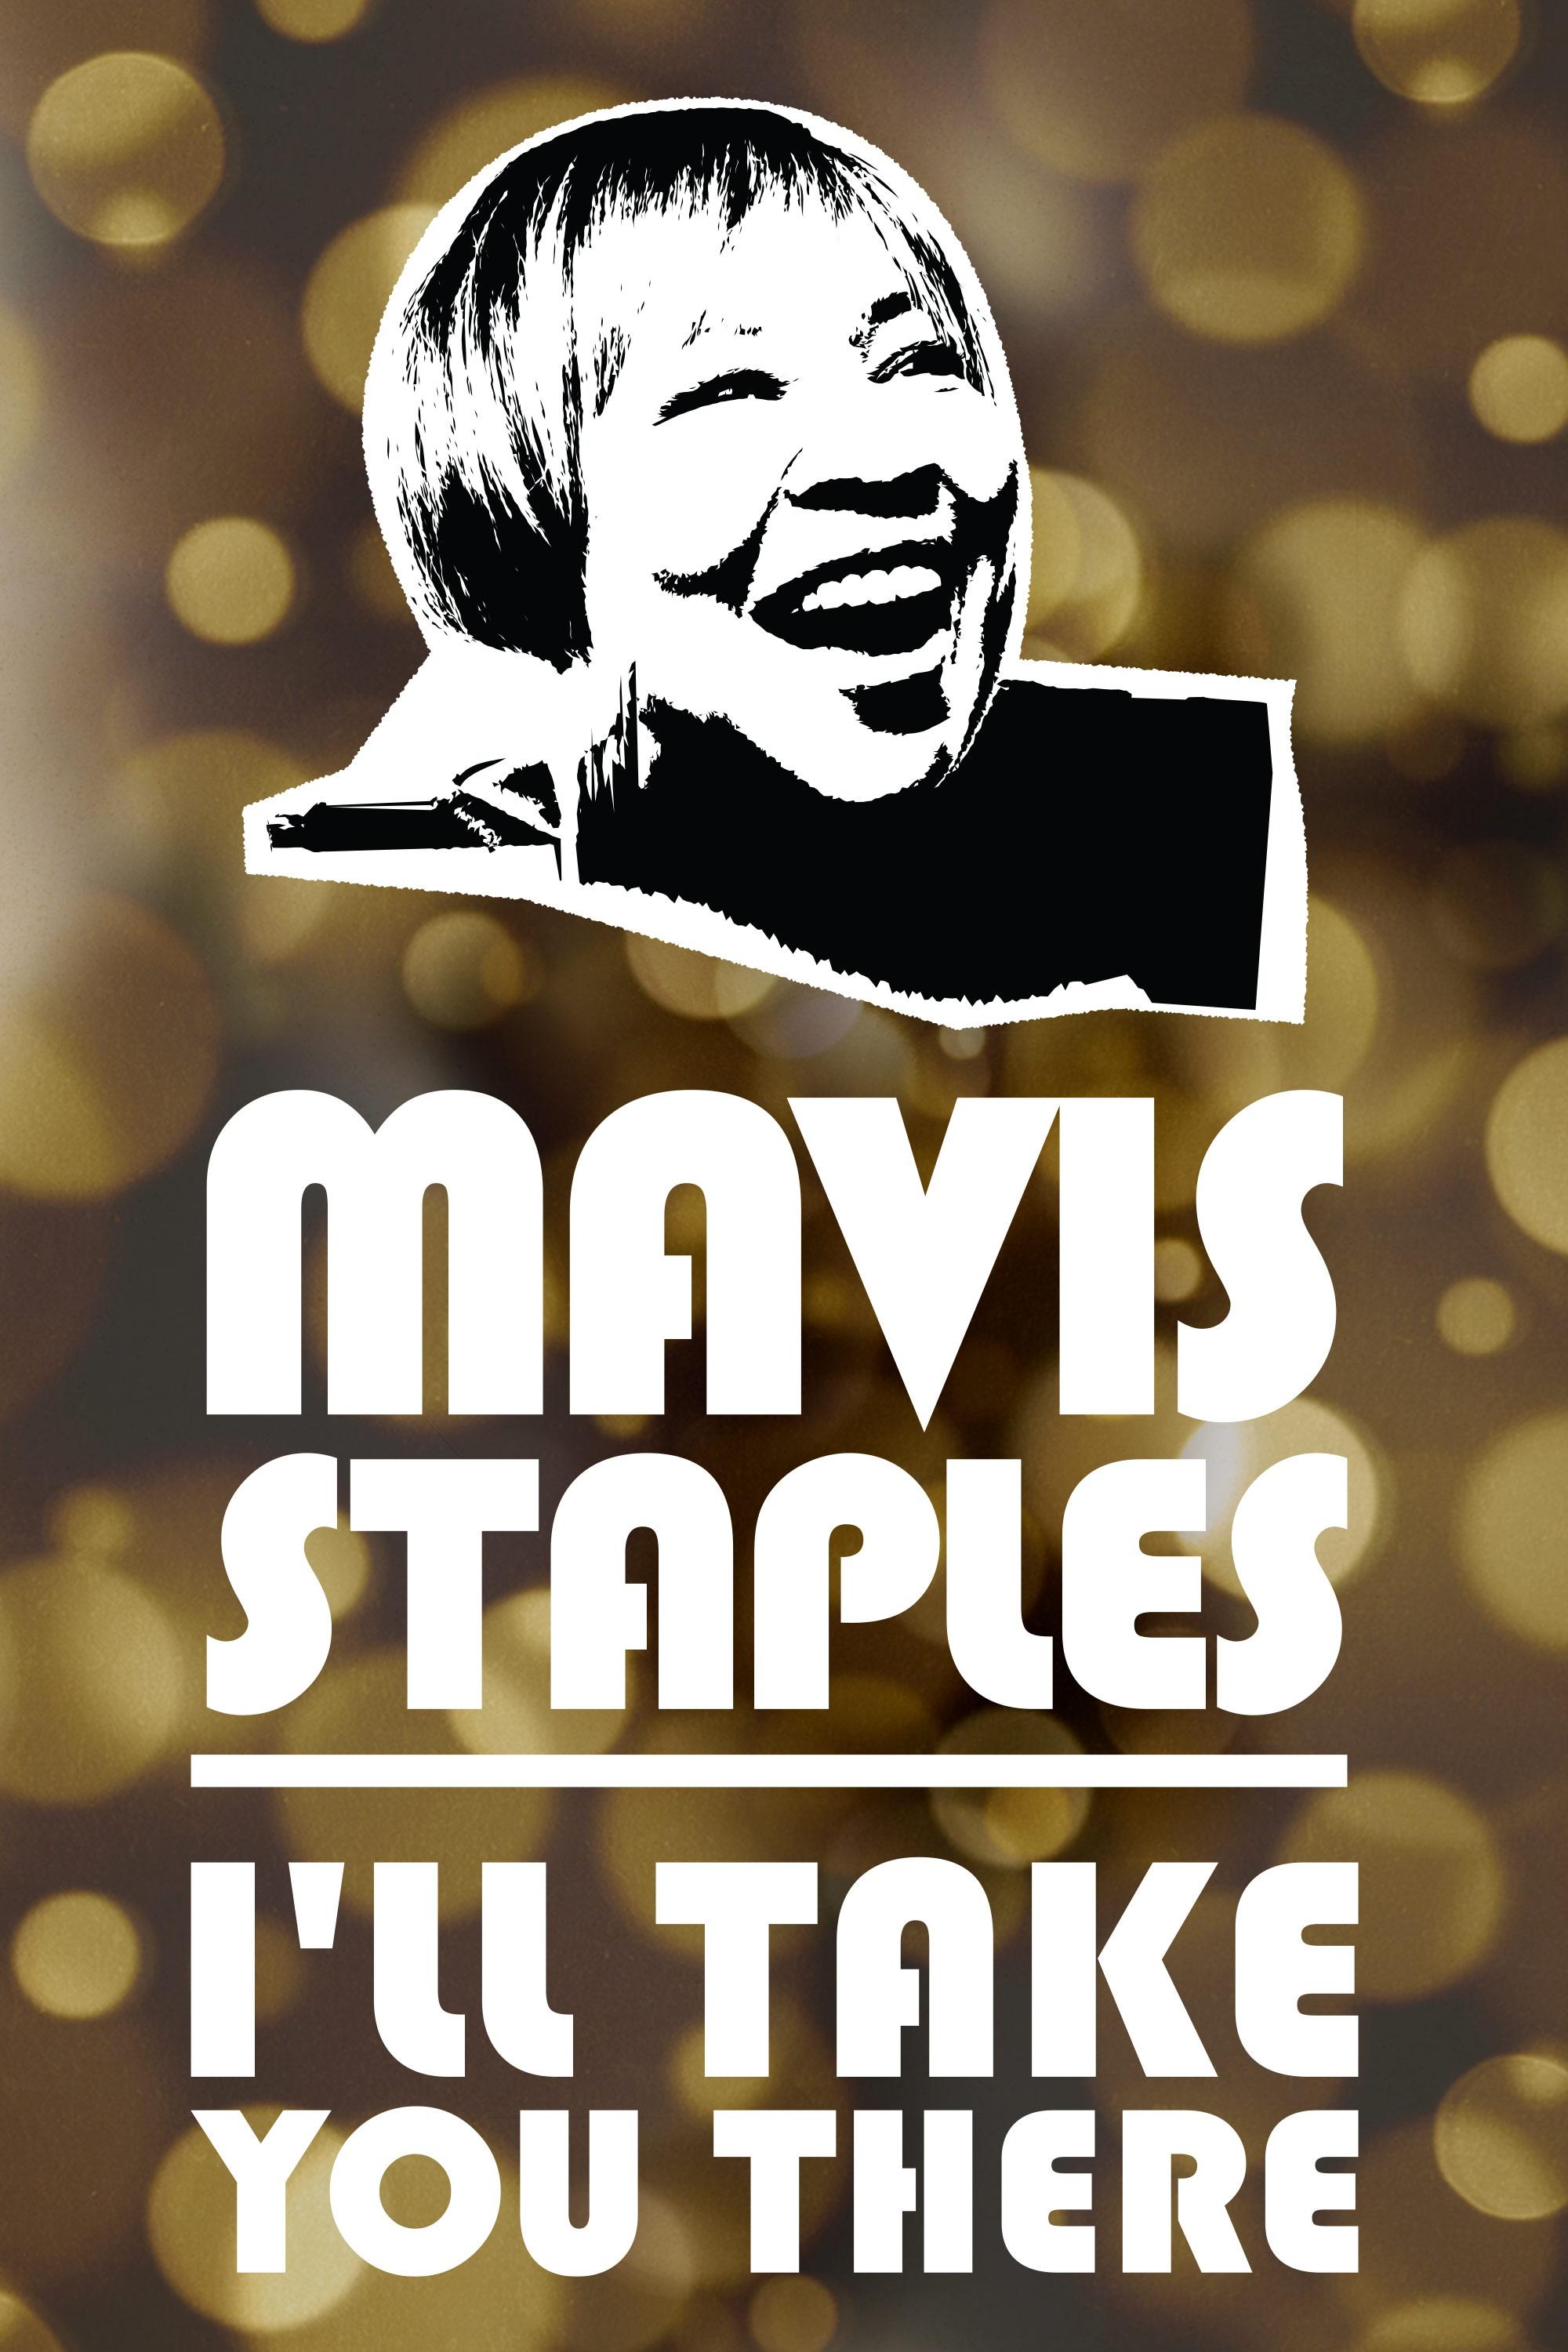 Mavis Staples: I'll Take You There - An All-Star Concert